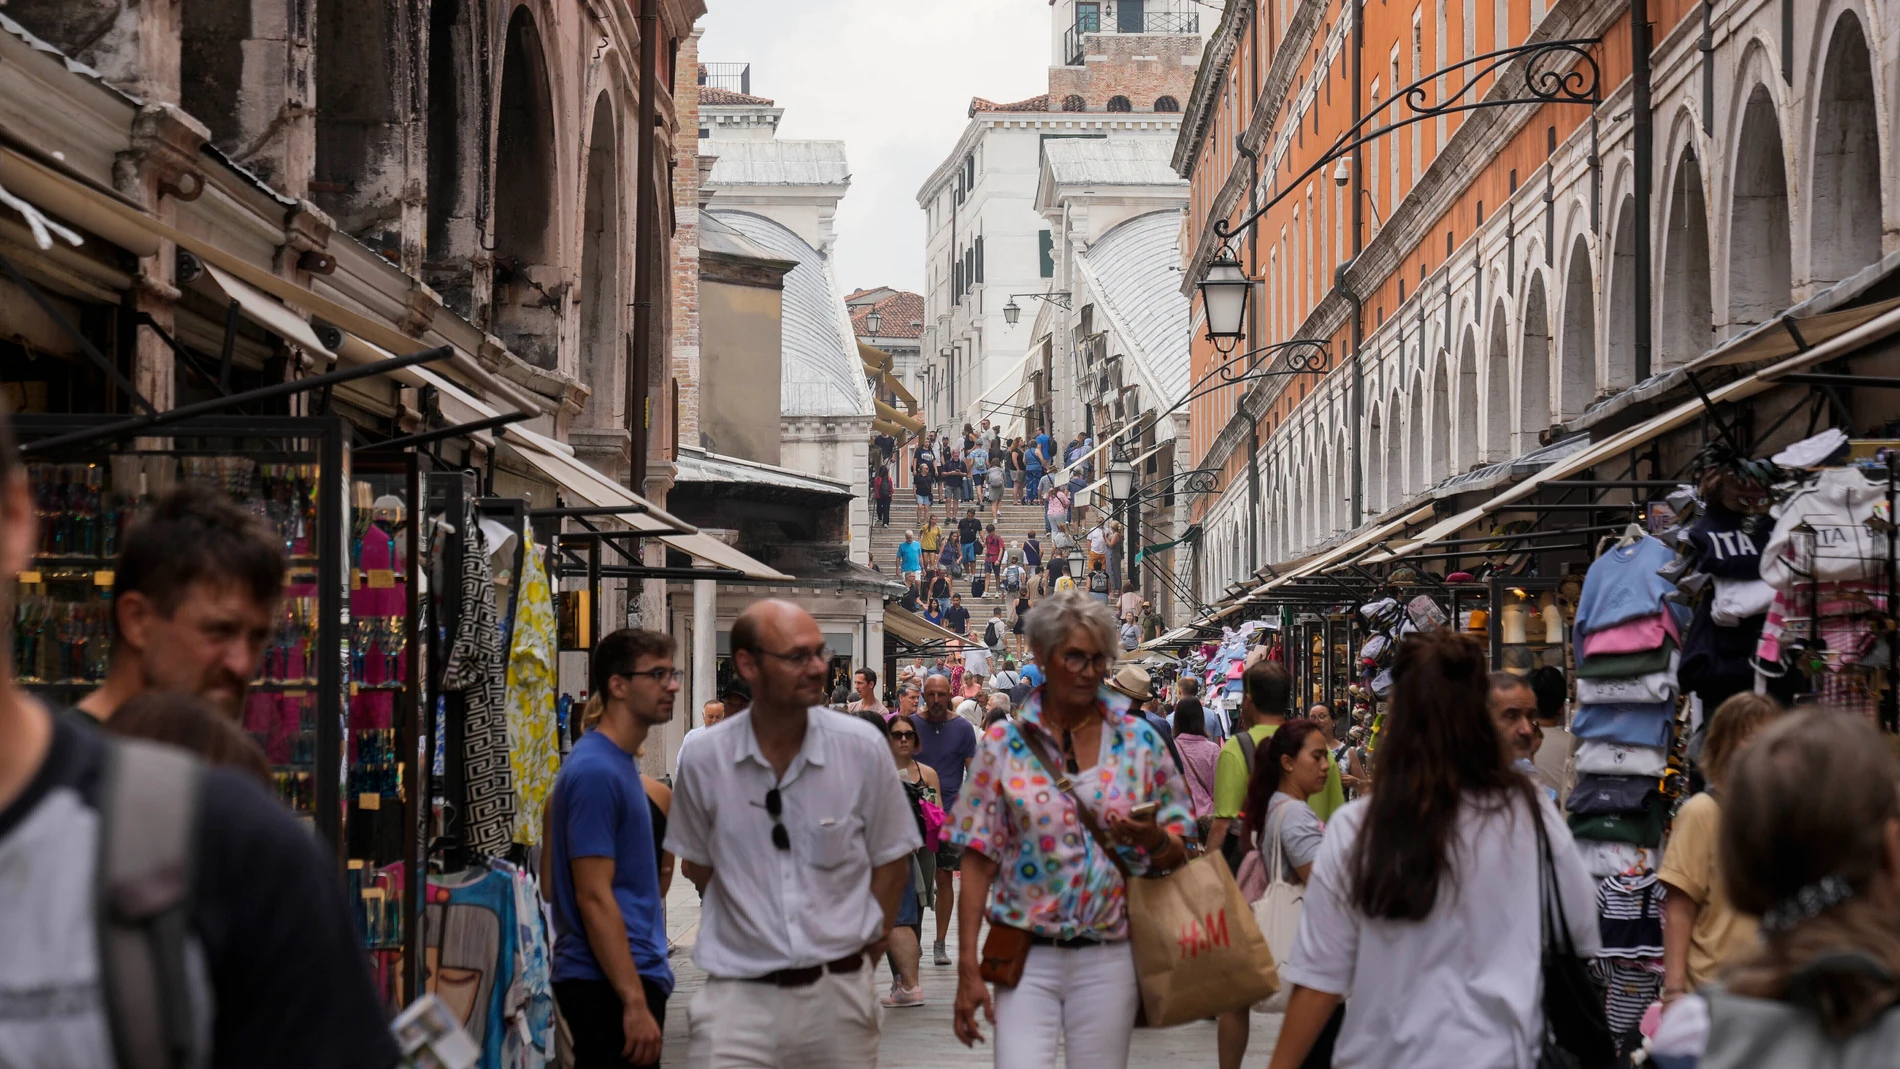 FILE -Tourists walk in a crowded street in Venice, Italy, Wednesday, Sept. 13, 2023. Venice on Saturday, Dec. 30, 2023 announced new limits on the size of tourist groups in another measure aimed at reducing the pressure of mass tourism on the famed canal city. Starting in June, groups will be limited to 25 people. (AP Photo/Luca Bruno, File)